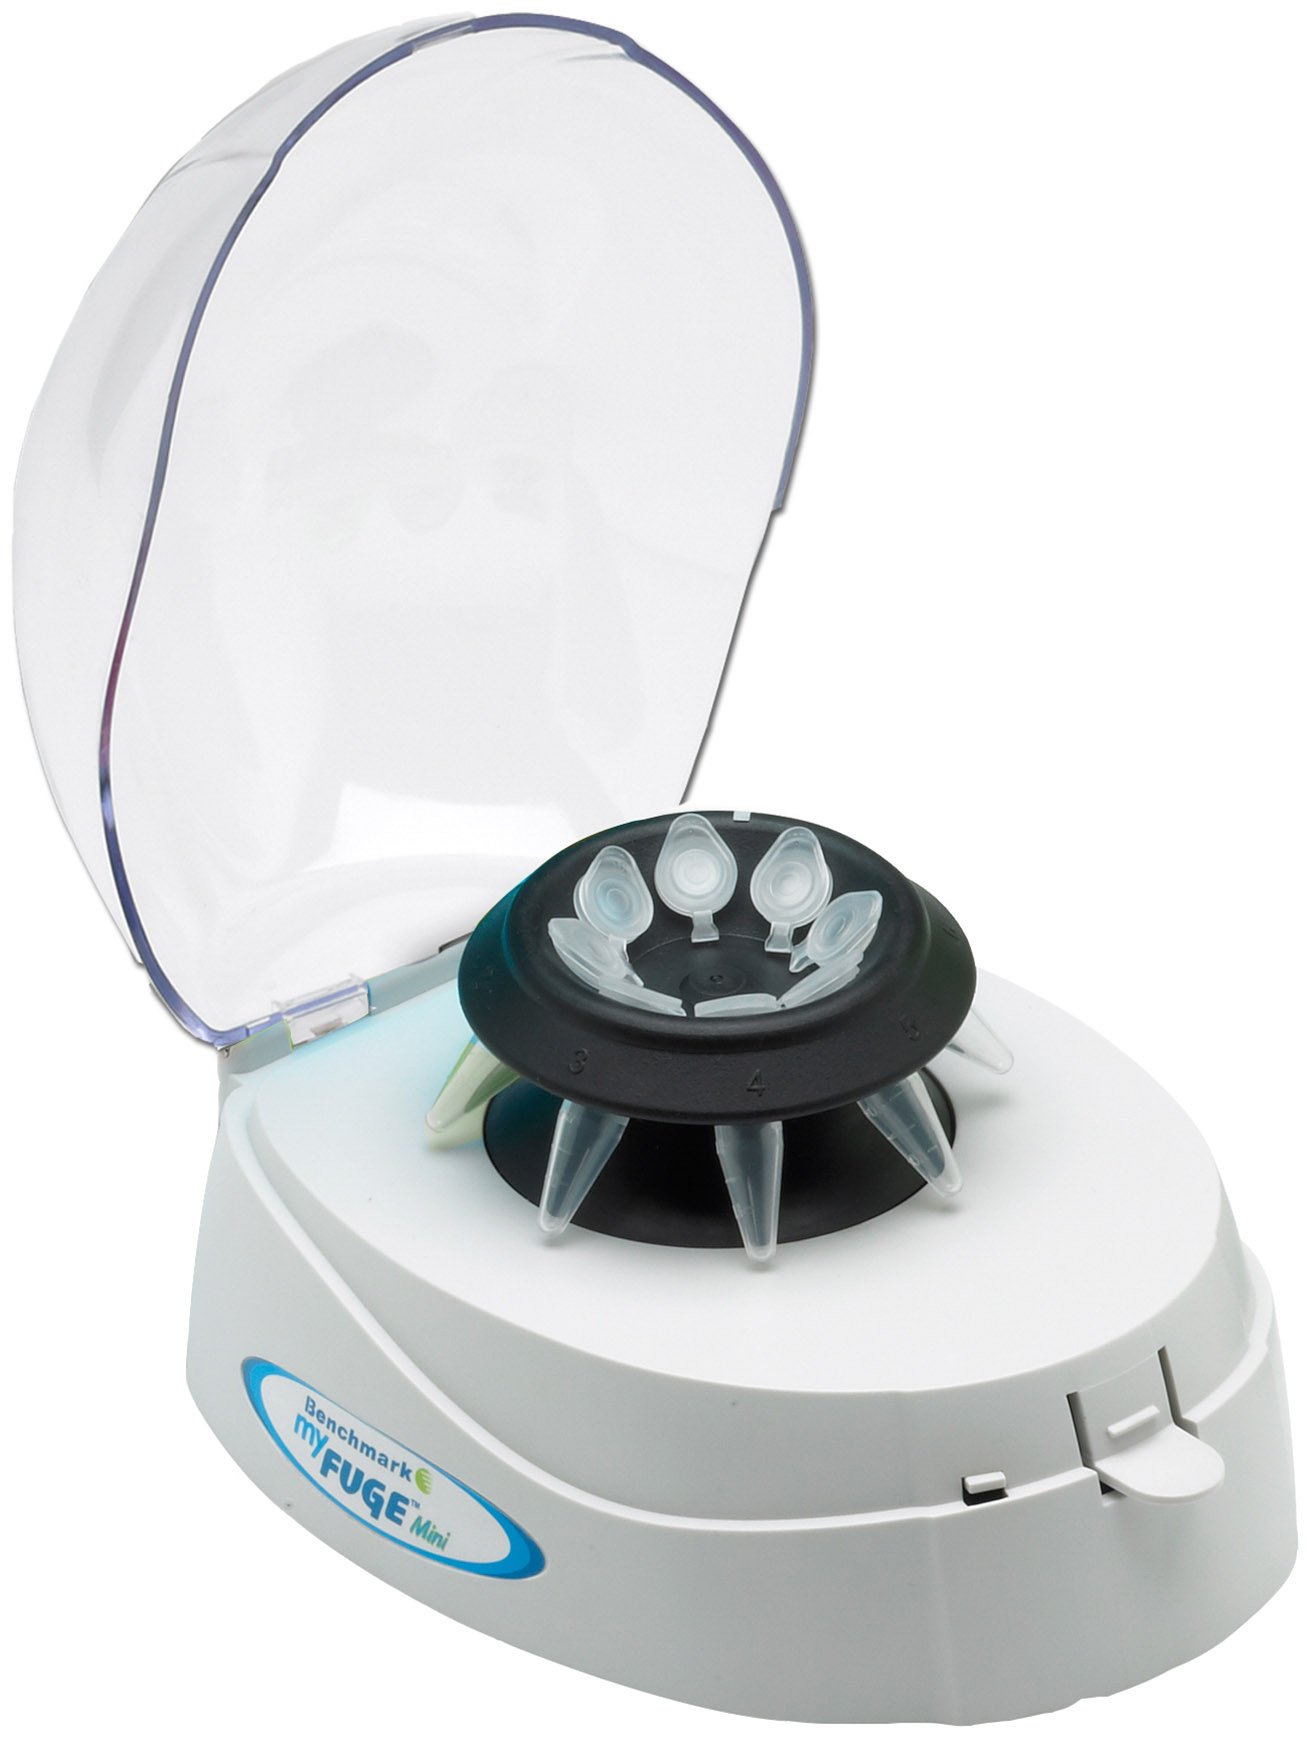 MyFuge Mini MicroCentrifuge With Two Rotors For 1.5ml-2.0ml Tubes & 0.2ml PCR Tubes - Clear Lid